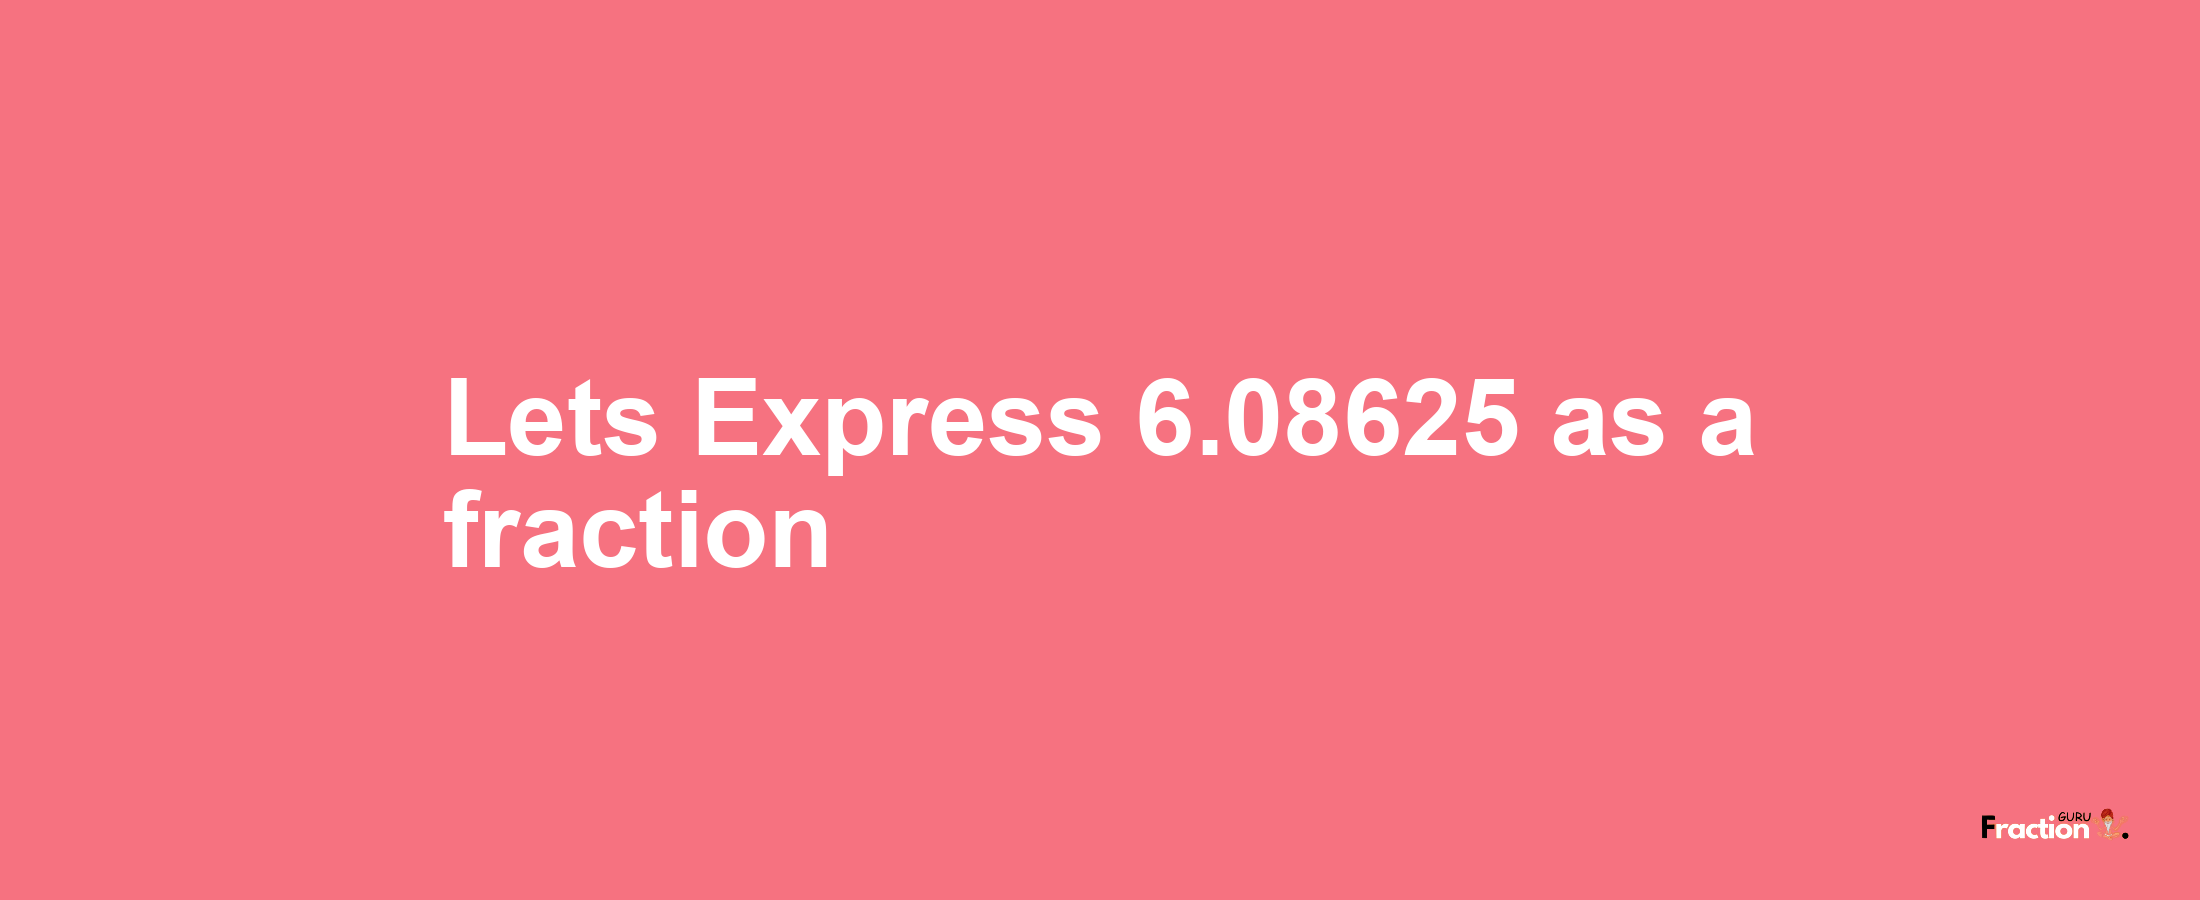 Lets Express 6.08625 as afraction